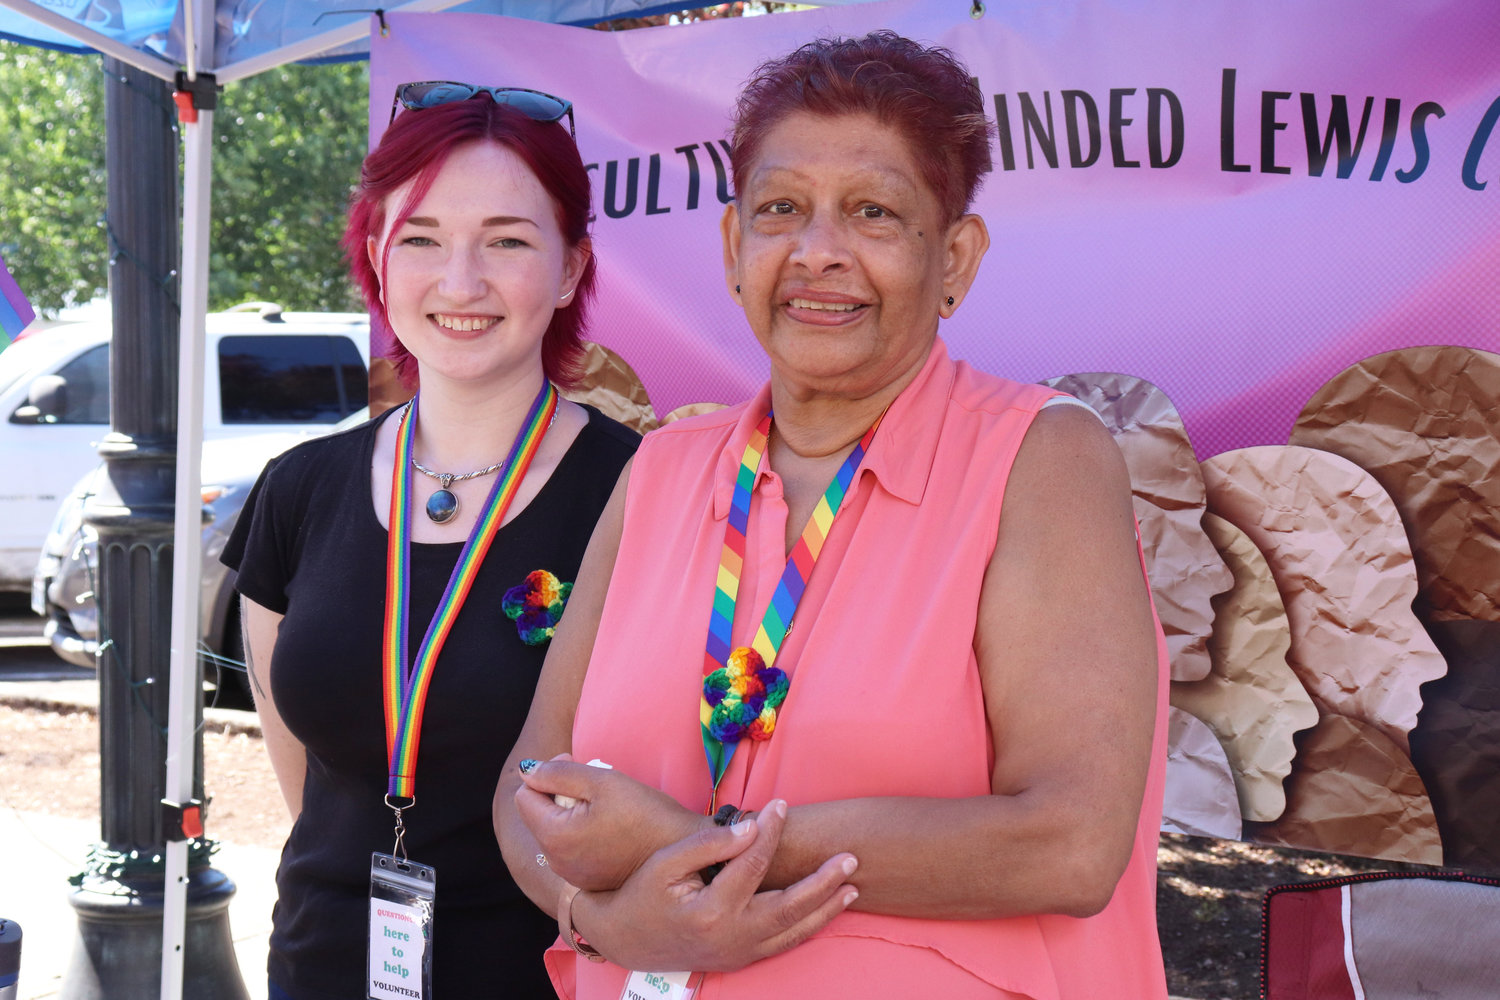 From left, Justine Pense and Usha Sahadeva-Brooks of Multicuturally Minded Lewis County pose for a photo during Lewis County Pride in Centralia on Saturday. Sahadeva-Brooks also represents Lewis County Seniors and the local chapter of the International Optimists Club.